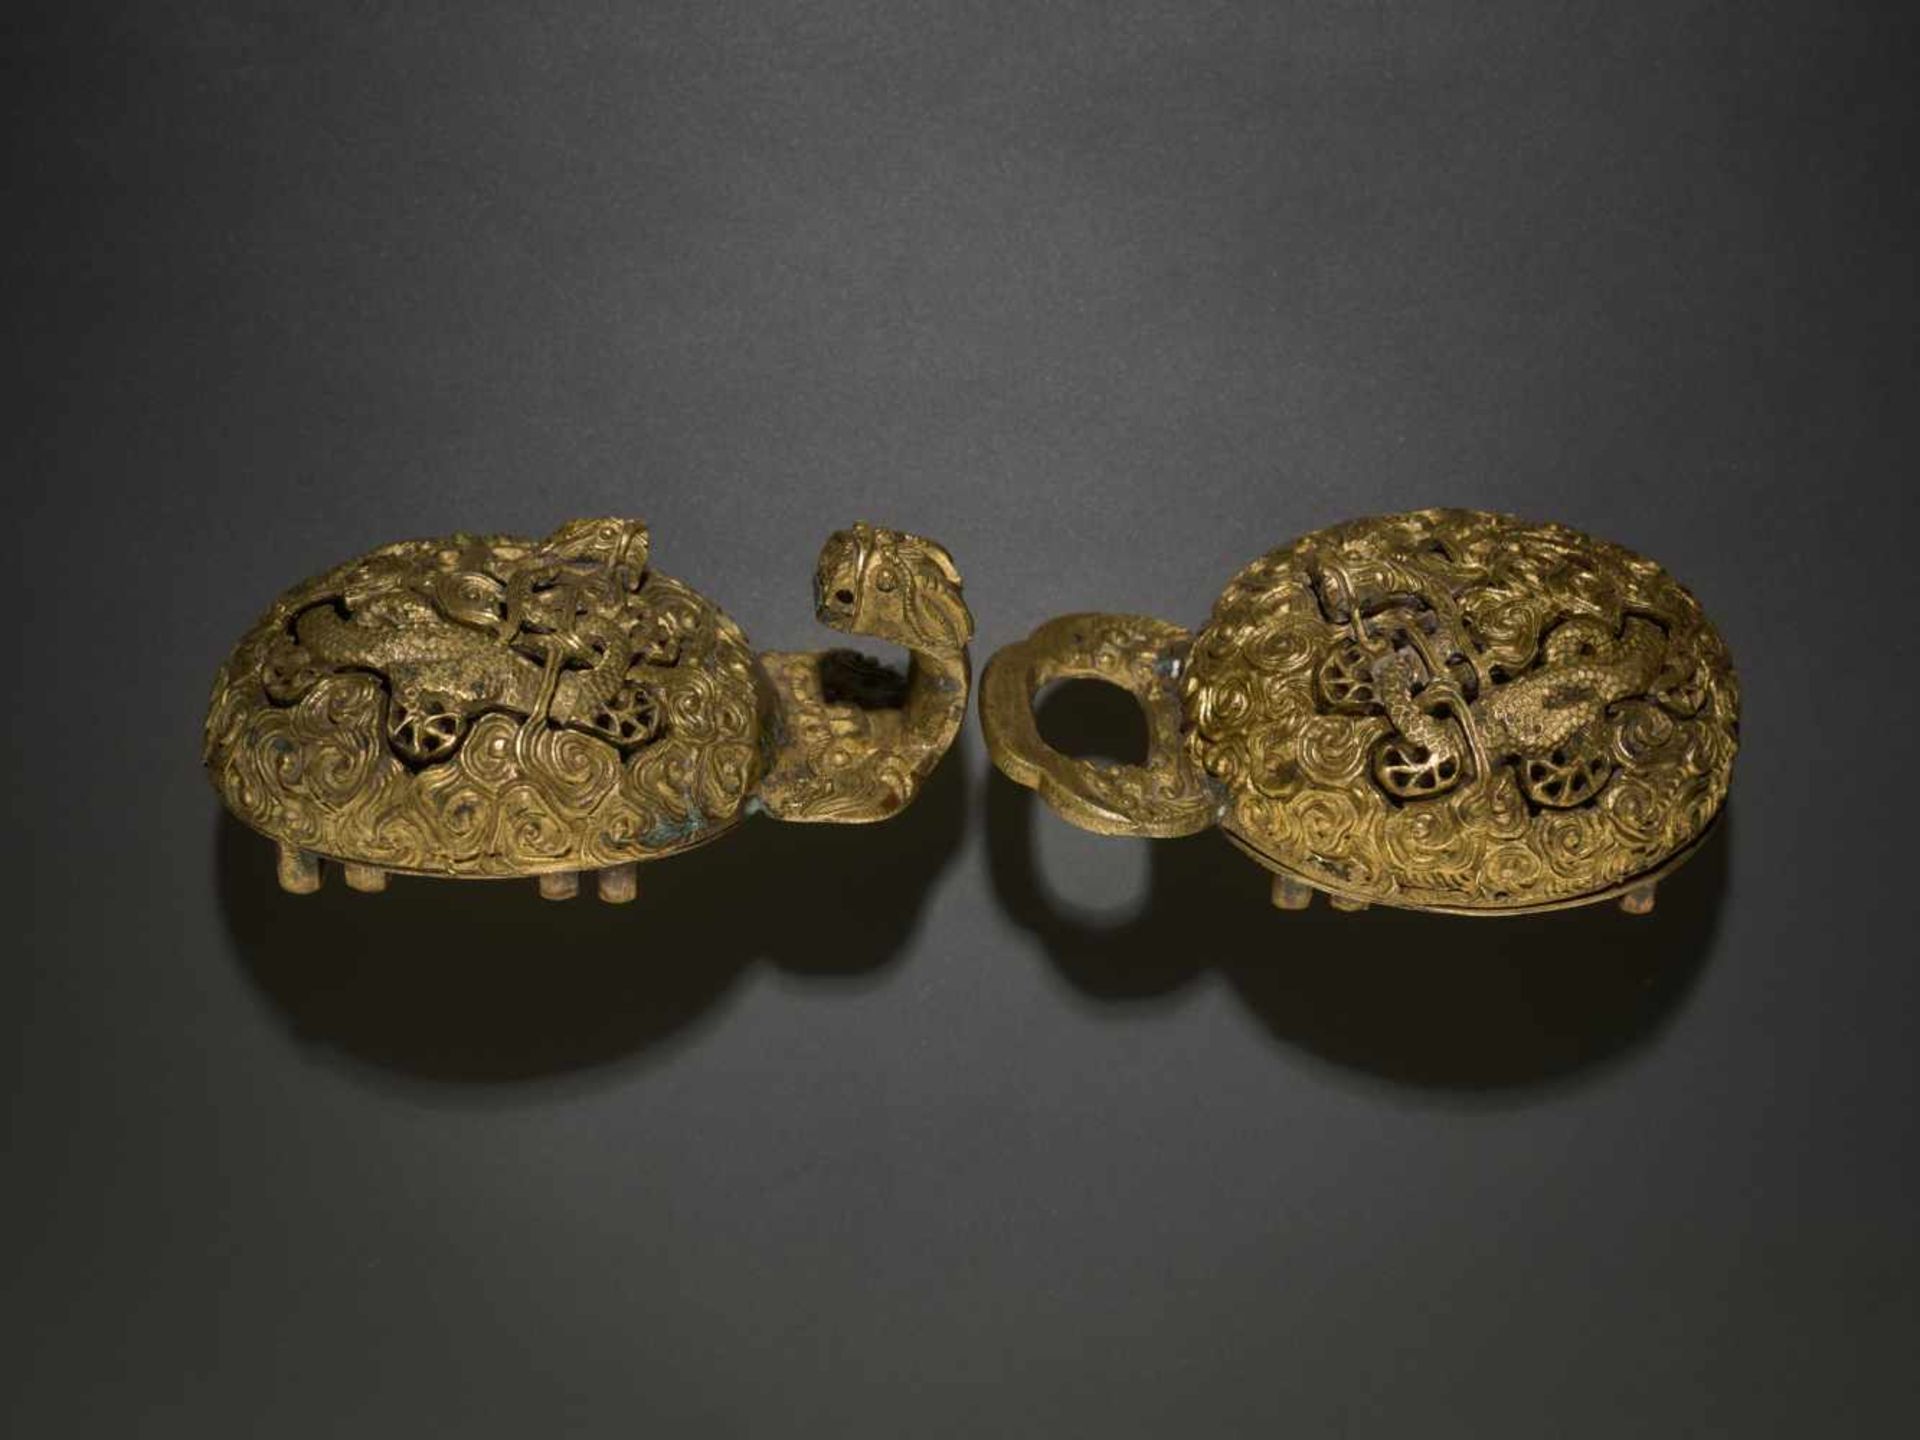 A RETICULATED BRONZE ‘DRAGON’ BELT BUCKLE, QING DYNASTY, 18TH CENTURY Bronze with original